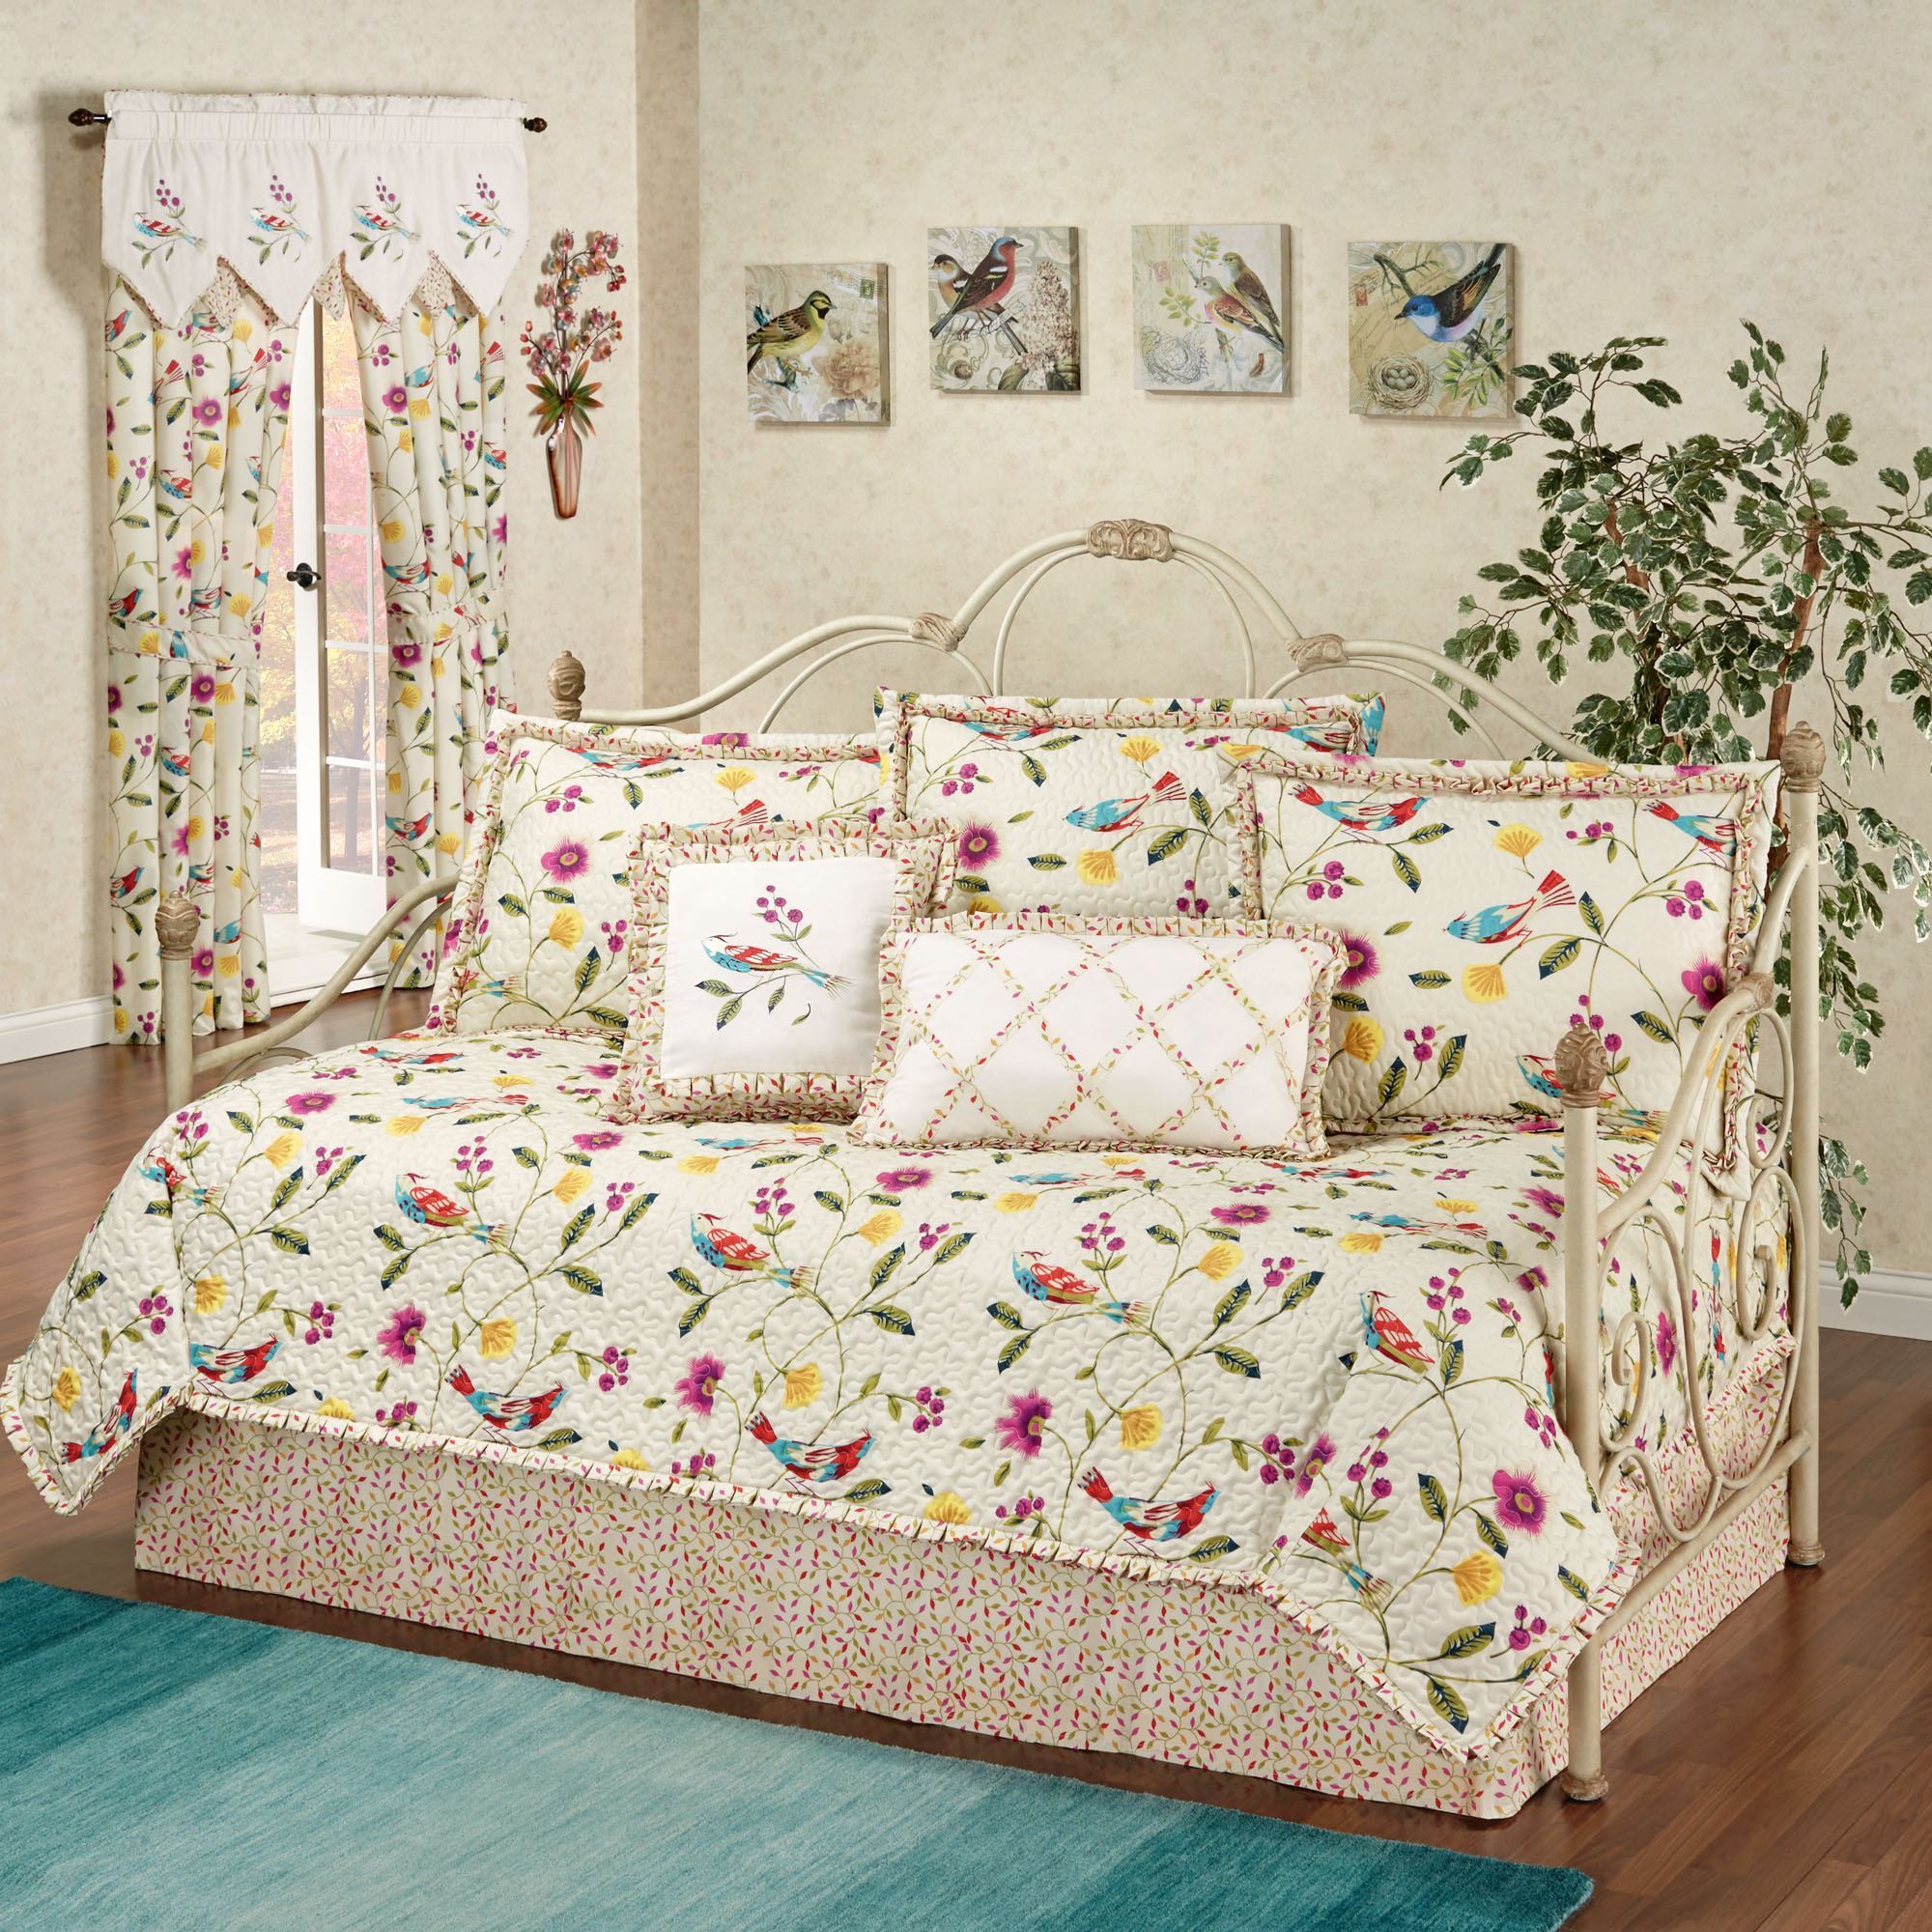 Daybed bedding sets for kids – magnificent plan and style